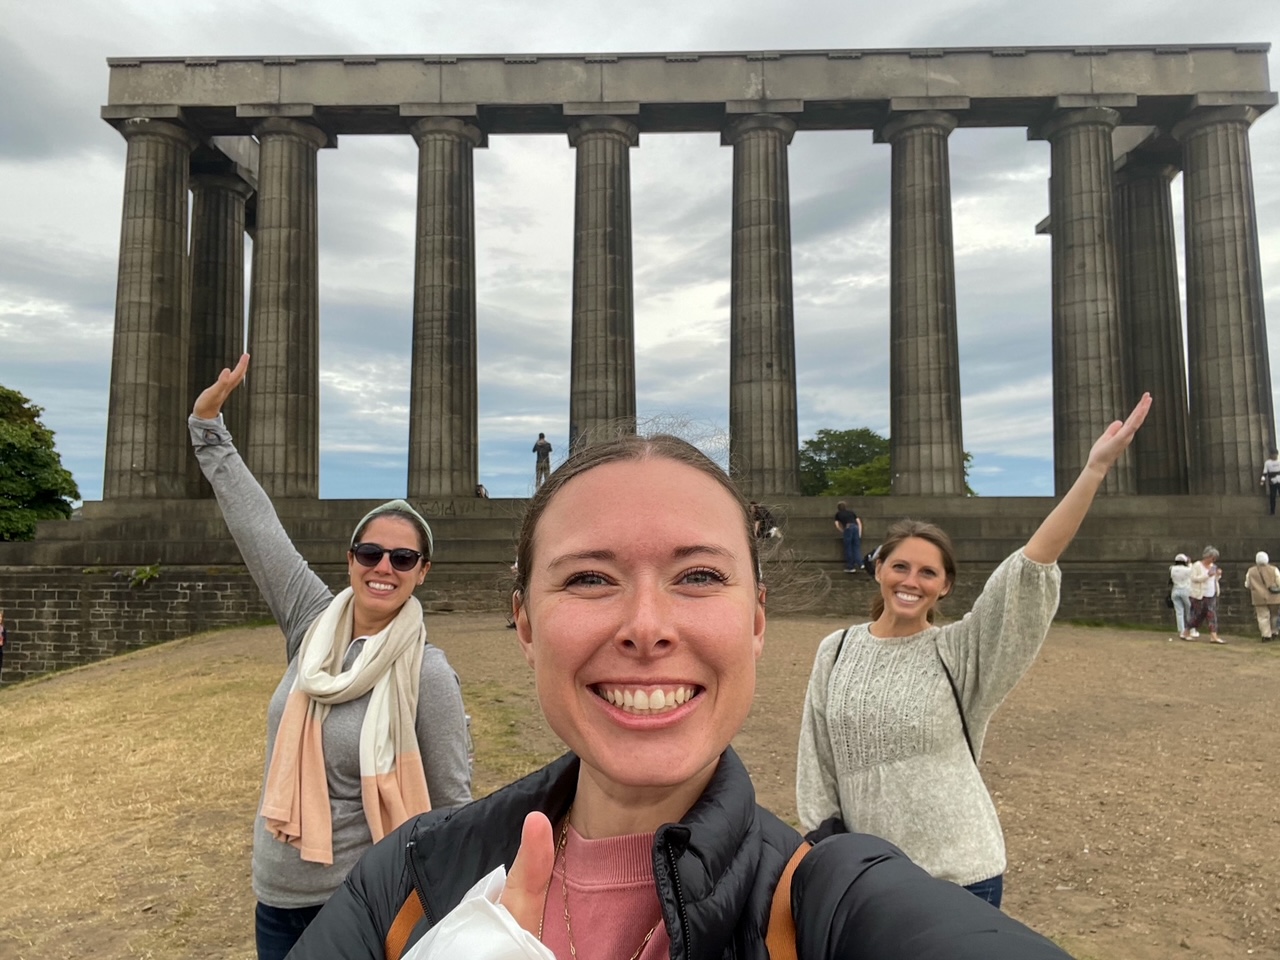 Stephanie, Kelsey & Sara at the National Monument at Calton Hill